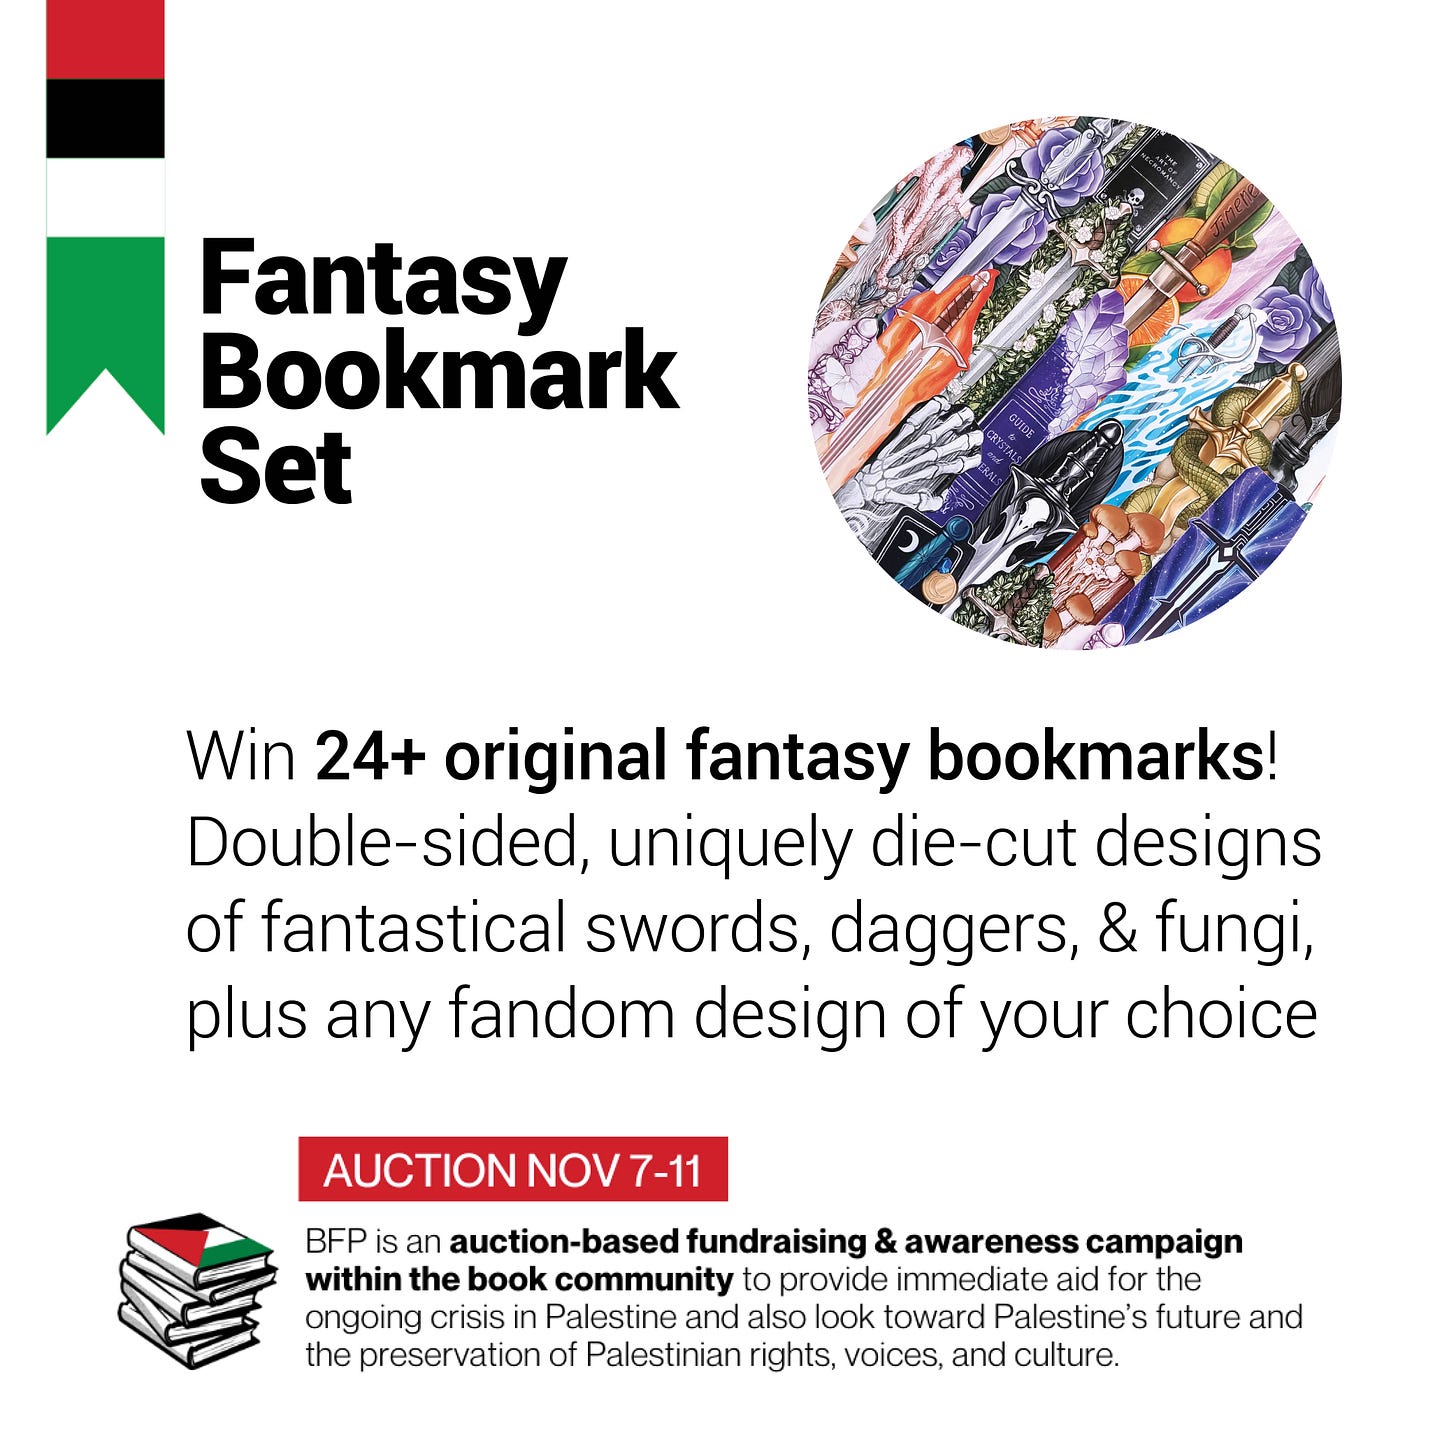 Graphic reading: **Fantasy Bookmark Set**. A circular image of many brightly coloured bookmarks laid on top of each other.  Win 24+ original fantasy bookmarks! Double-sided, uniquely die-cut designs of fantastical swords, daggers, & fungi, plus any fandom design of your choice  Auction: Nov 7-11. BFP is an auction-based fundraising & awareness campaign within the book community to provide immediate aid for the ongoing crisis in Palestine and also look toward Palestine’s future and the preservation of Palestinian right, voices, and culture.